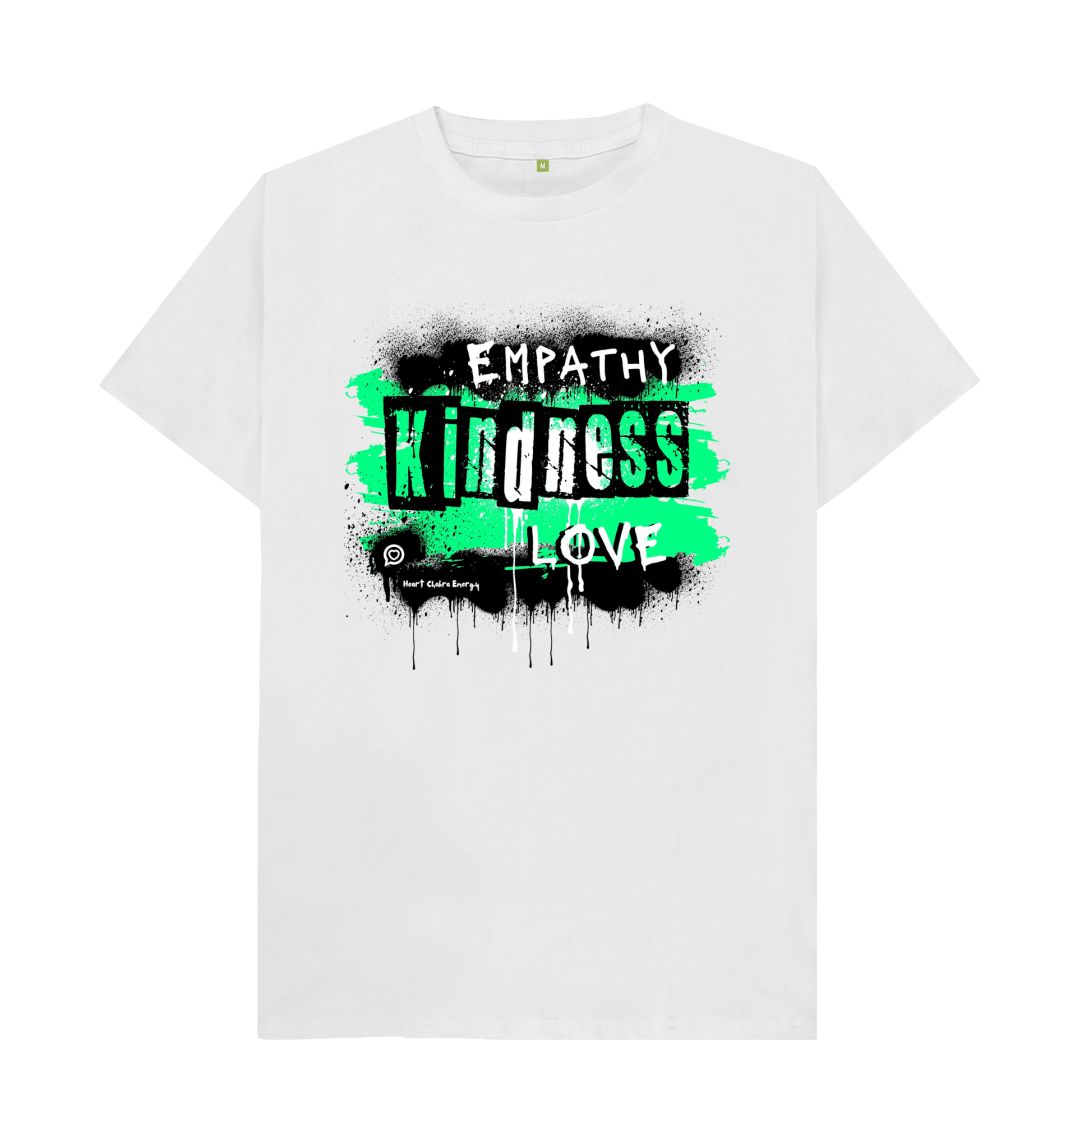 UNISEX\/Mens - Heart Chakra Energy (Green) - Words to Empower